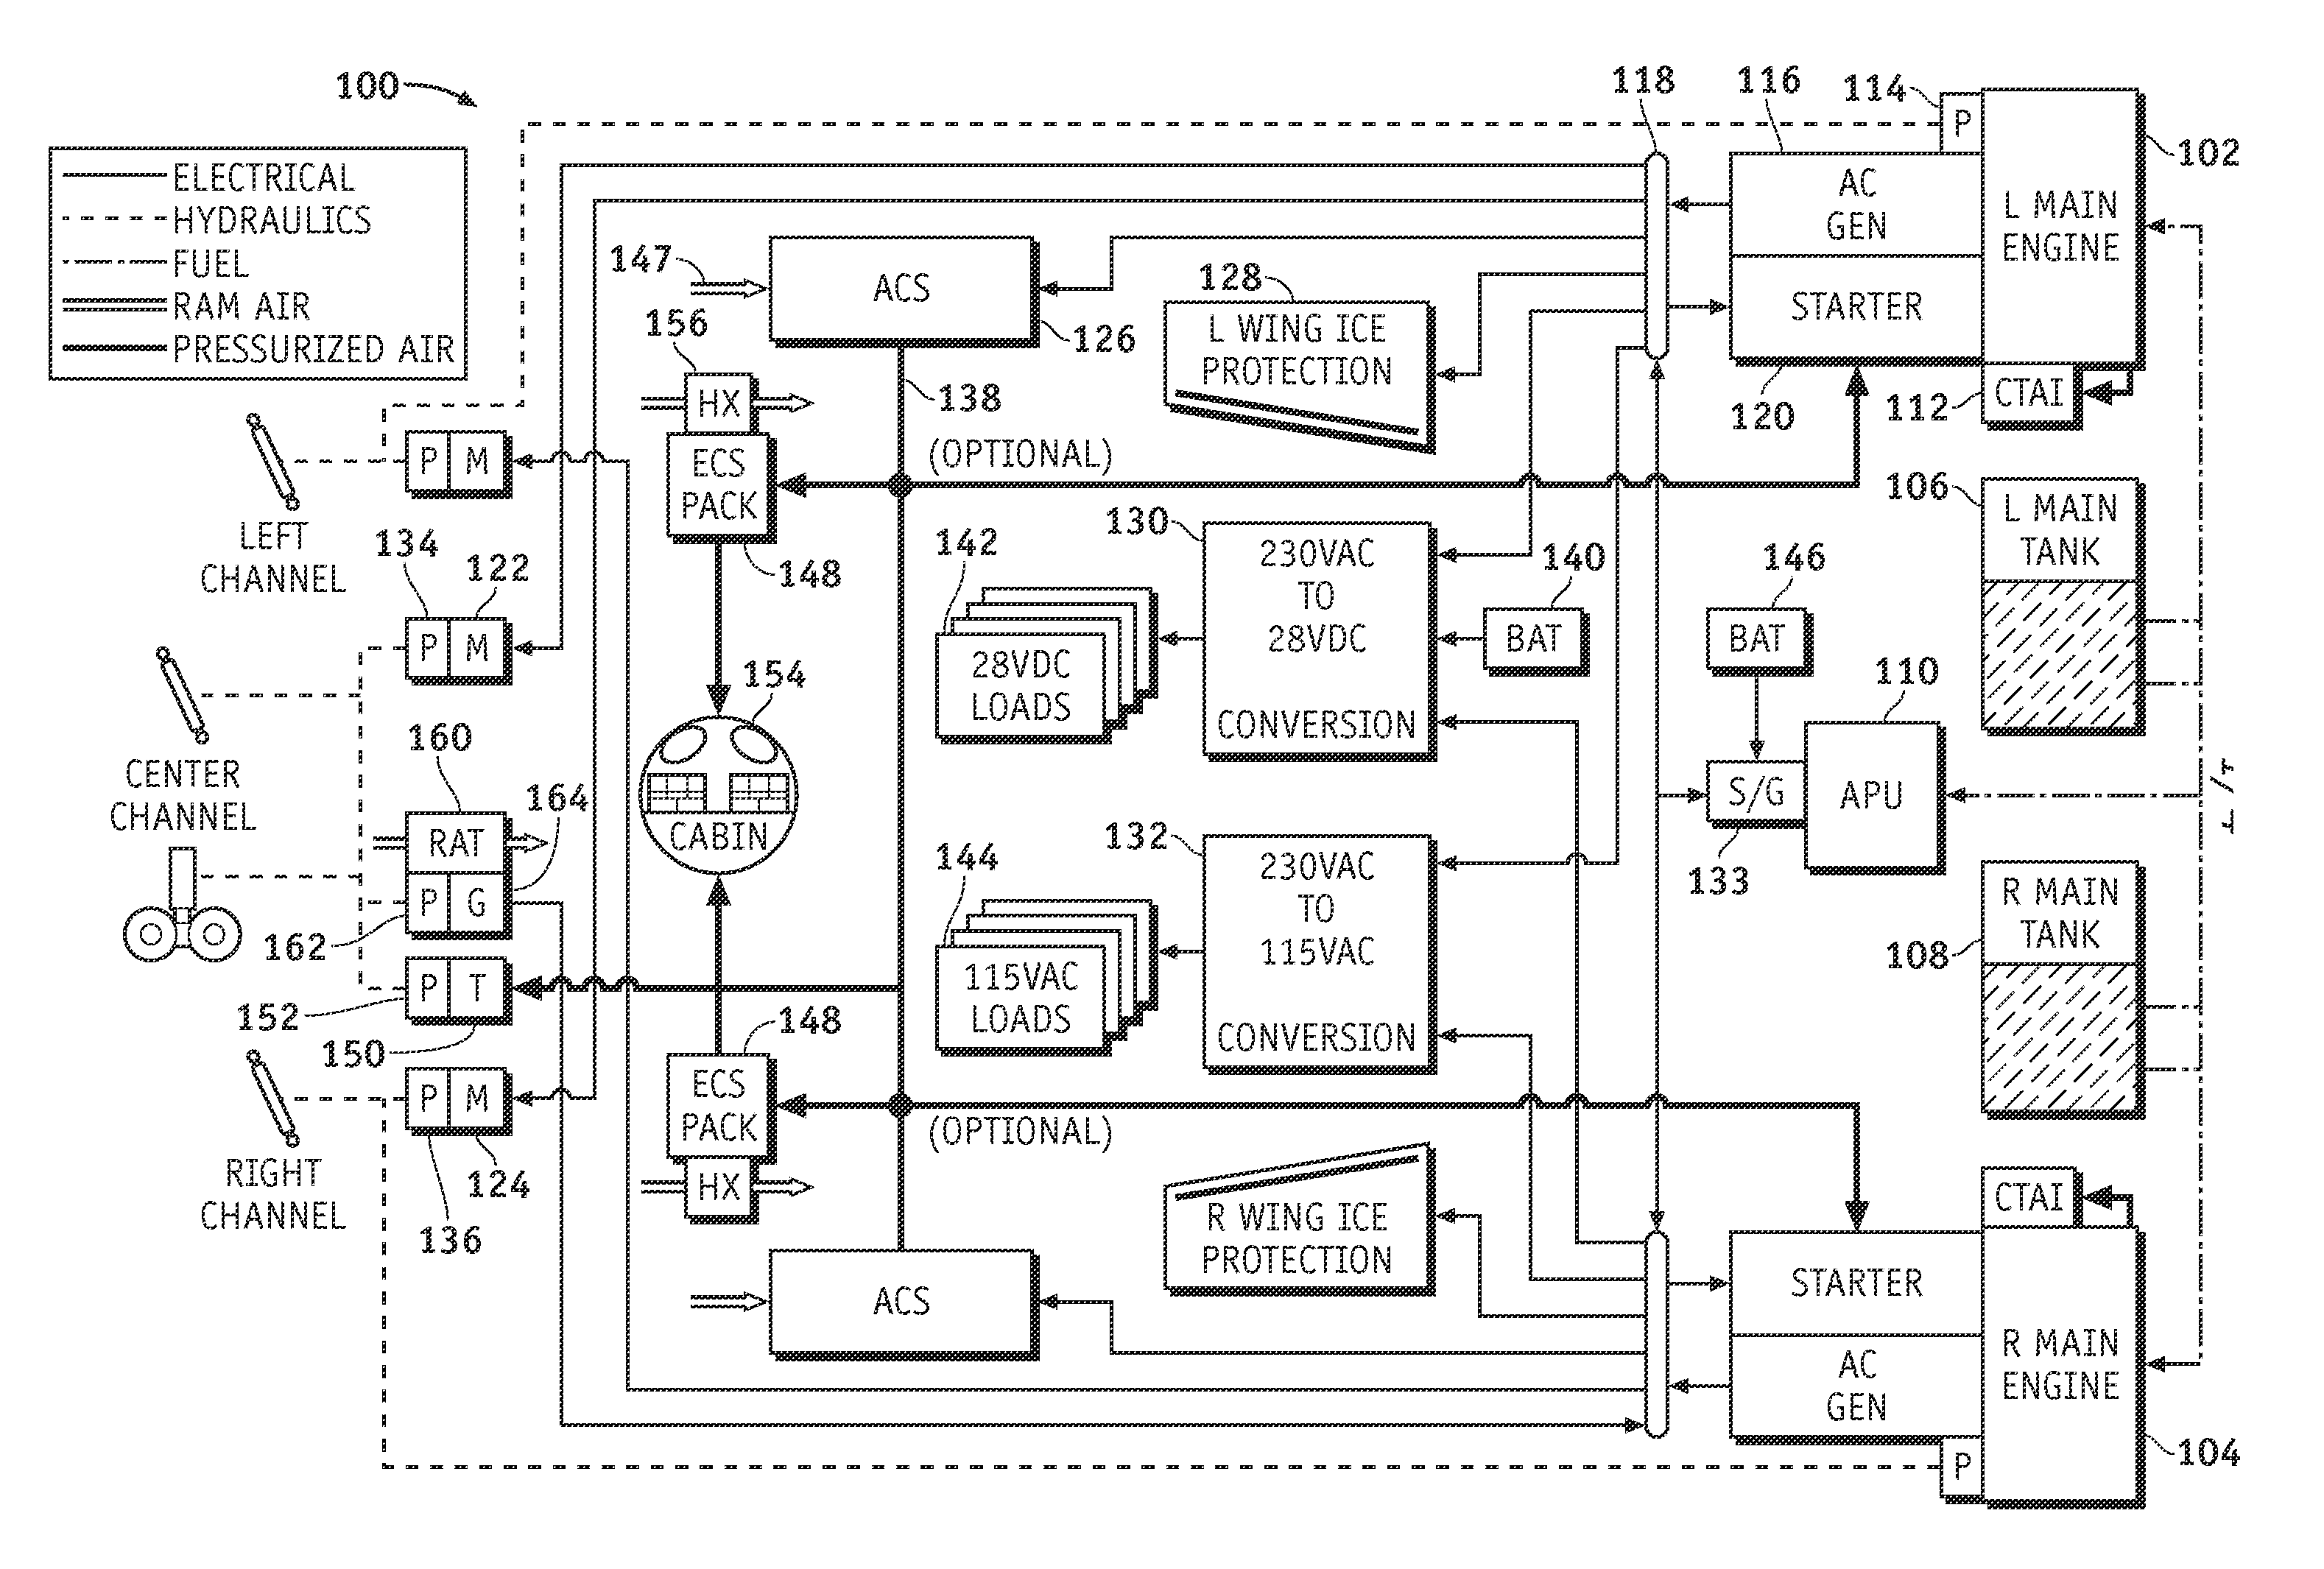 Electrical systems architecture for an aircraft, and related operating methods